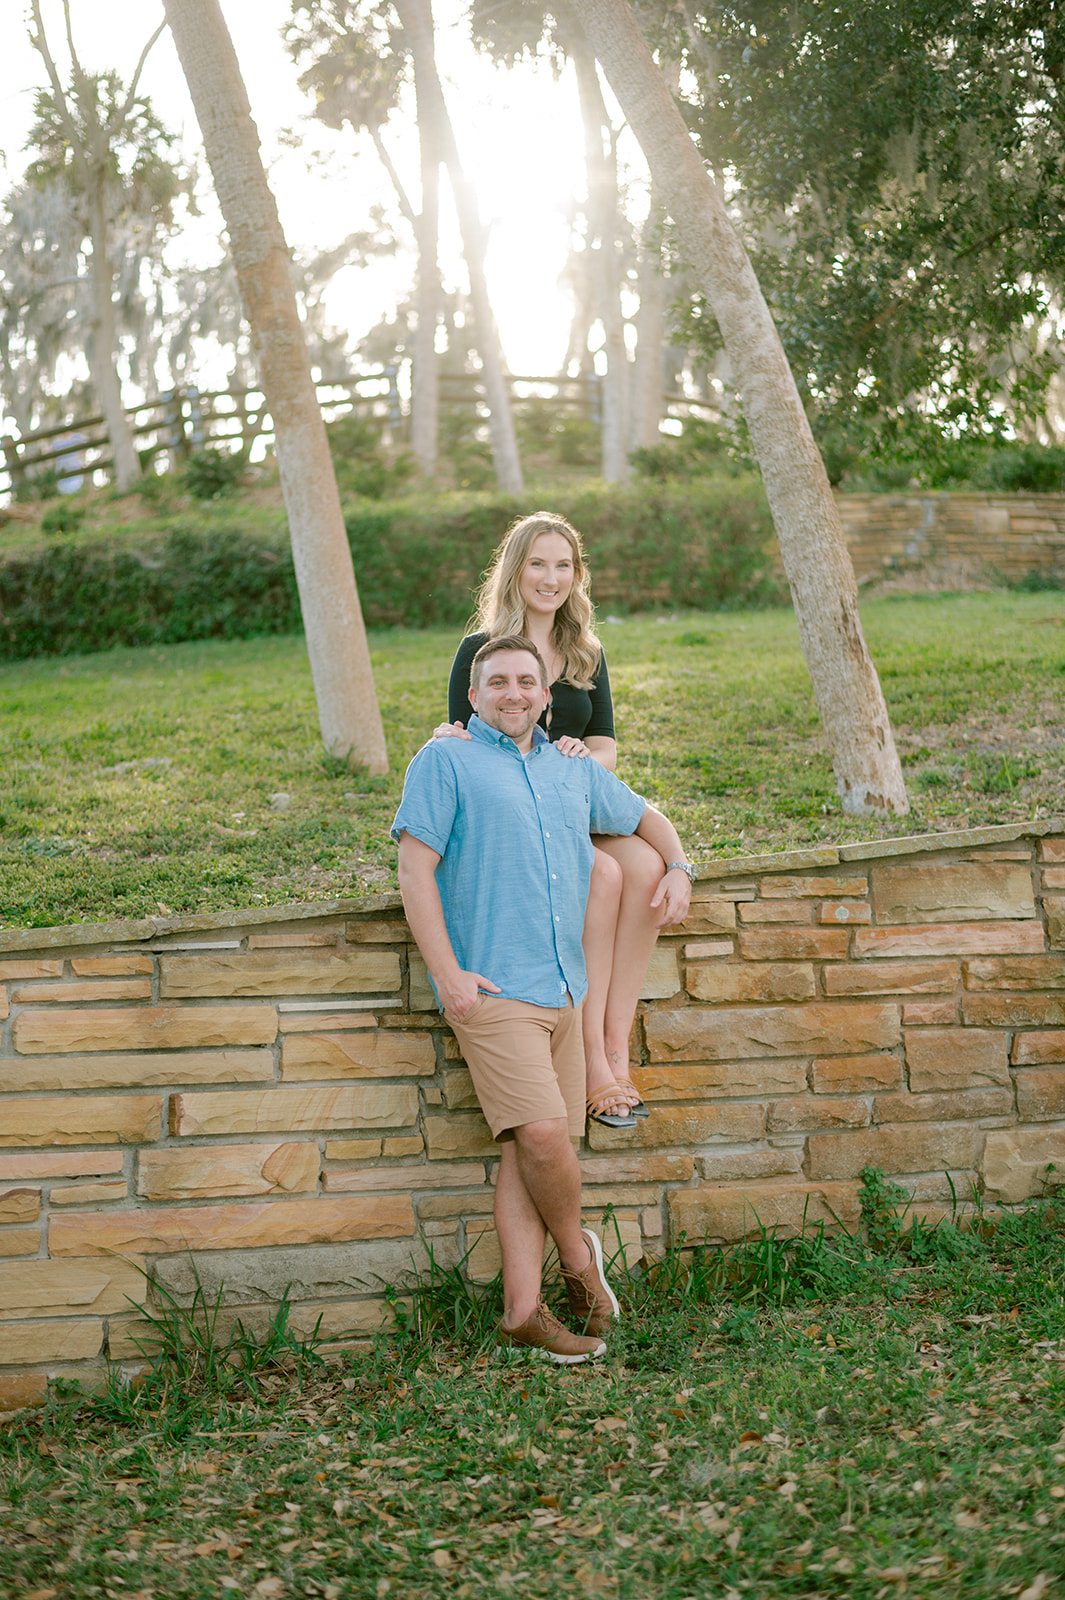 "Fun and casual engagement photo session in Tampa"
